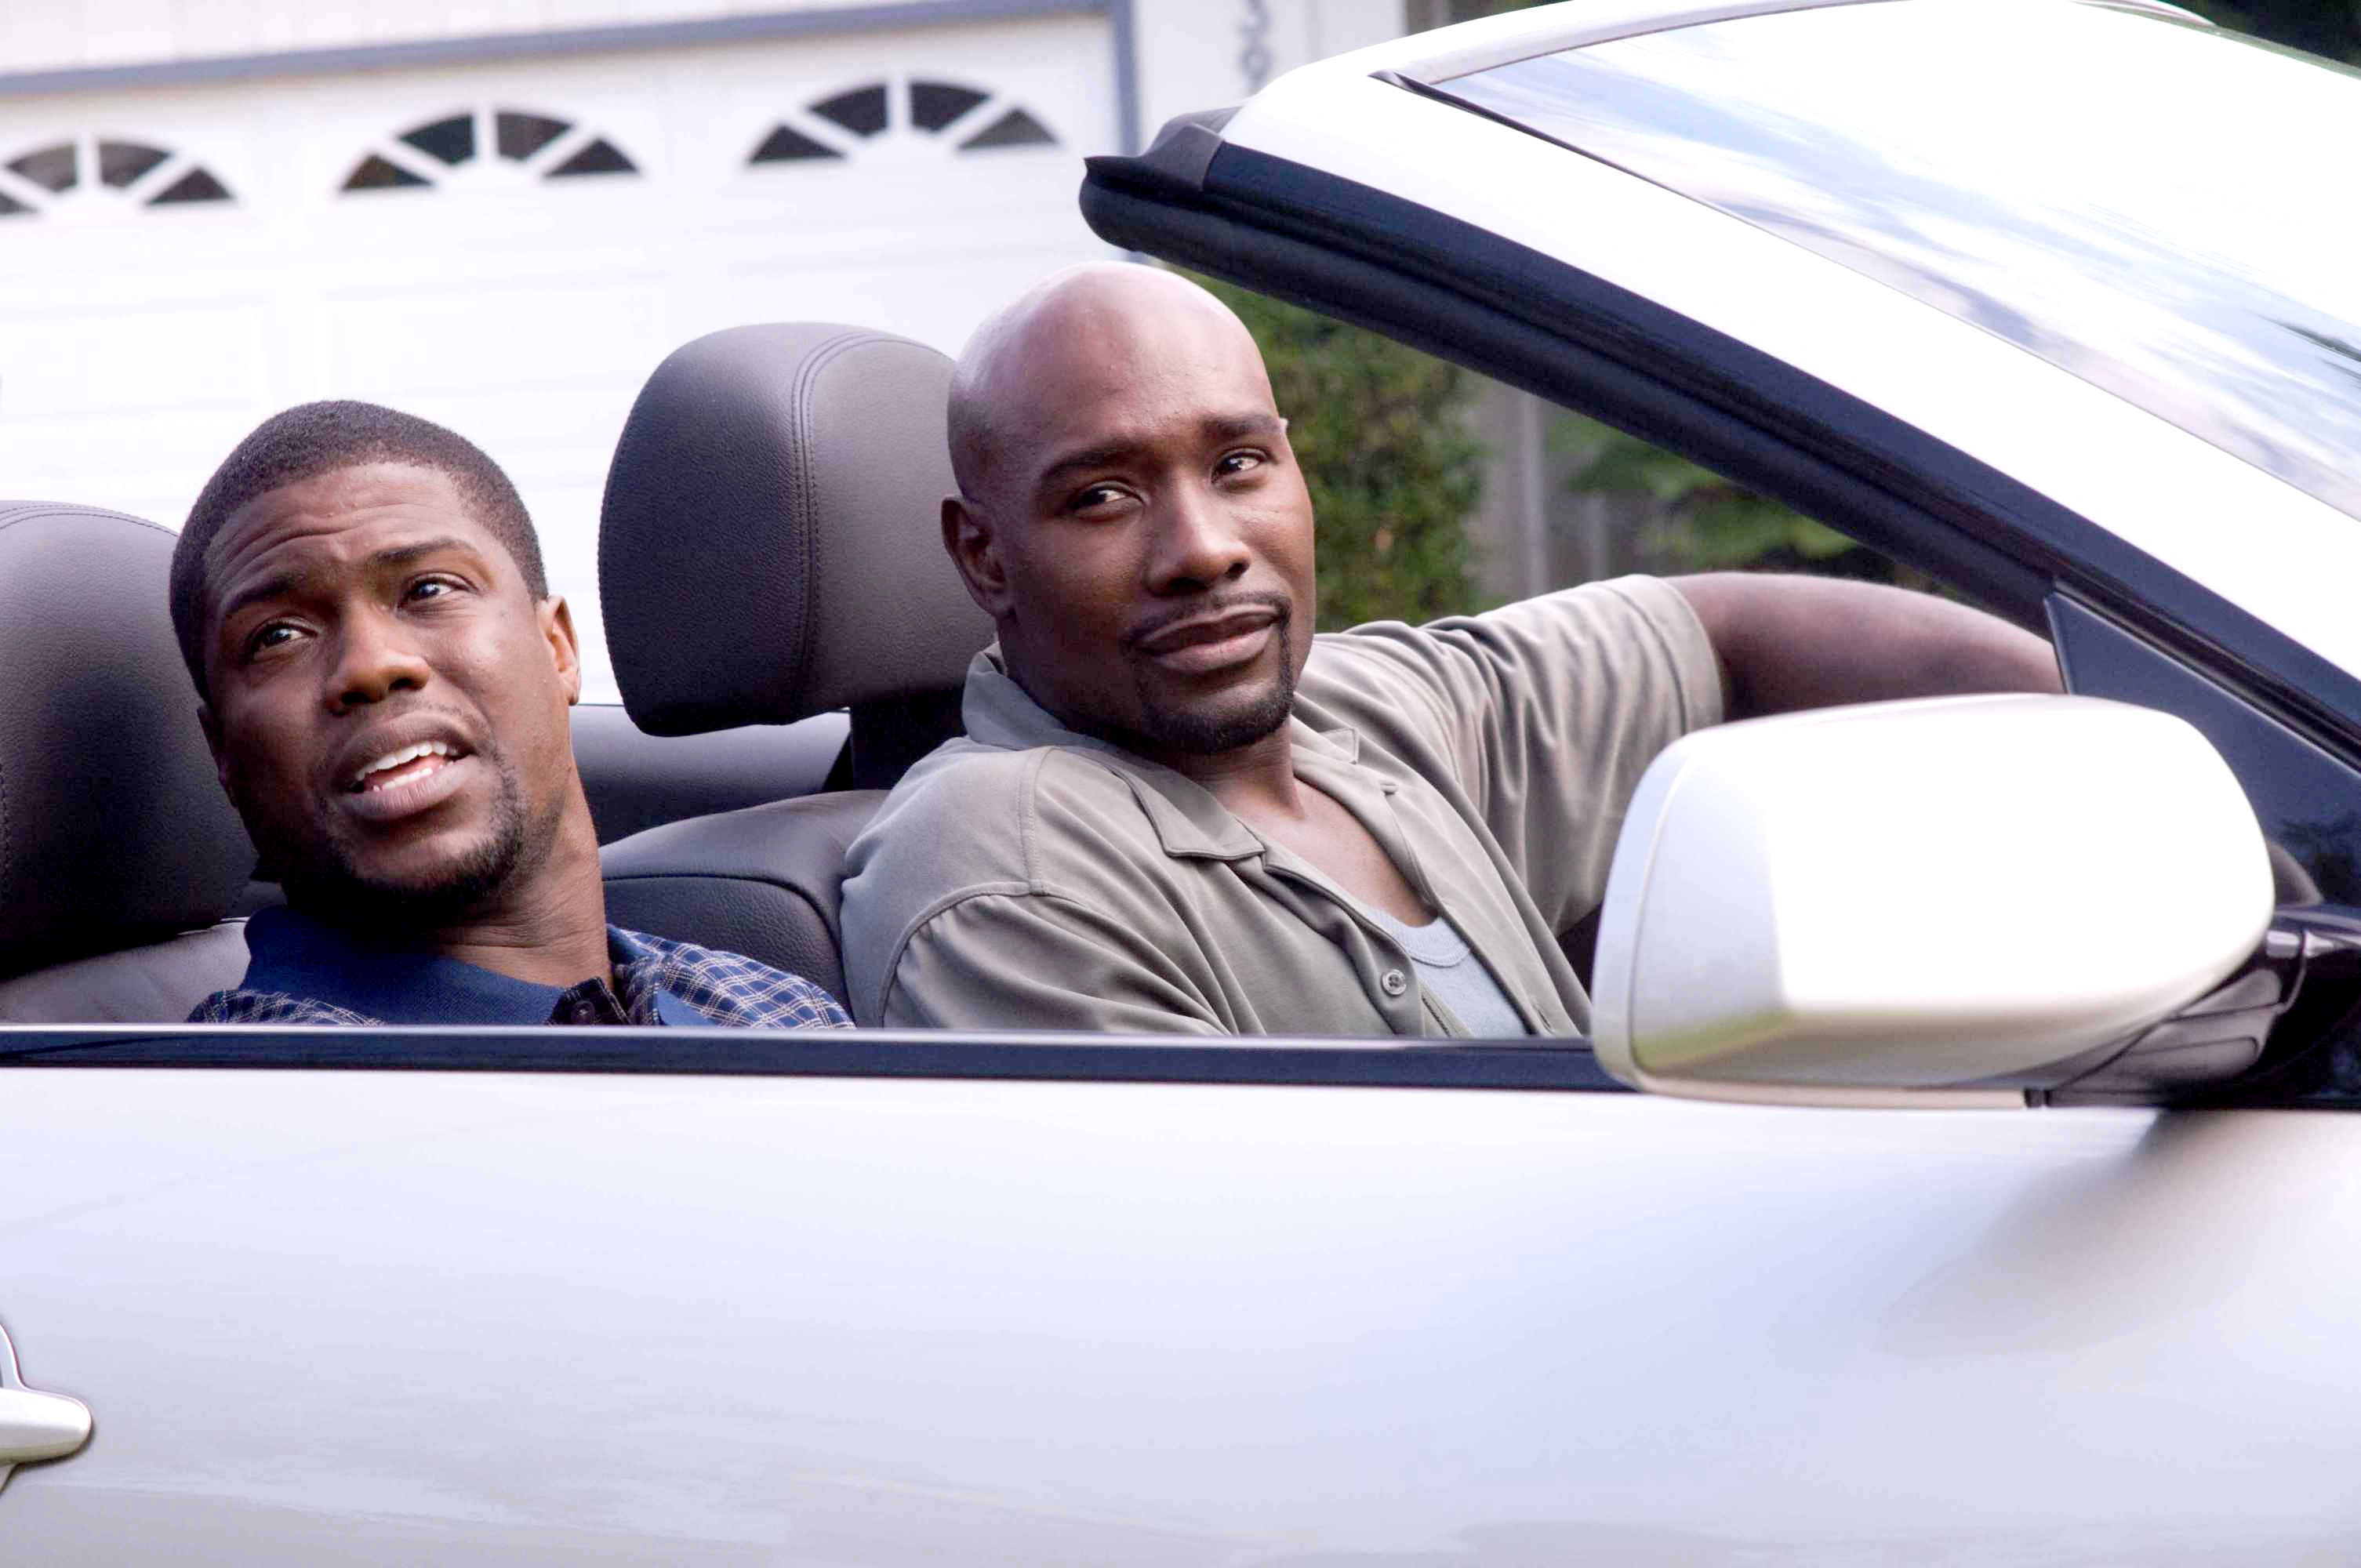 Kevin Hart stars as Tree and Morris Chestnut stars as Dave Johnson in Screen Gems' Not Easily Broken (2009). Photo credit by Ron Phillips.